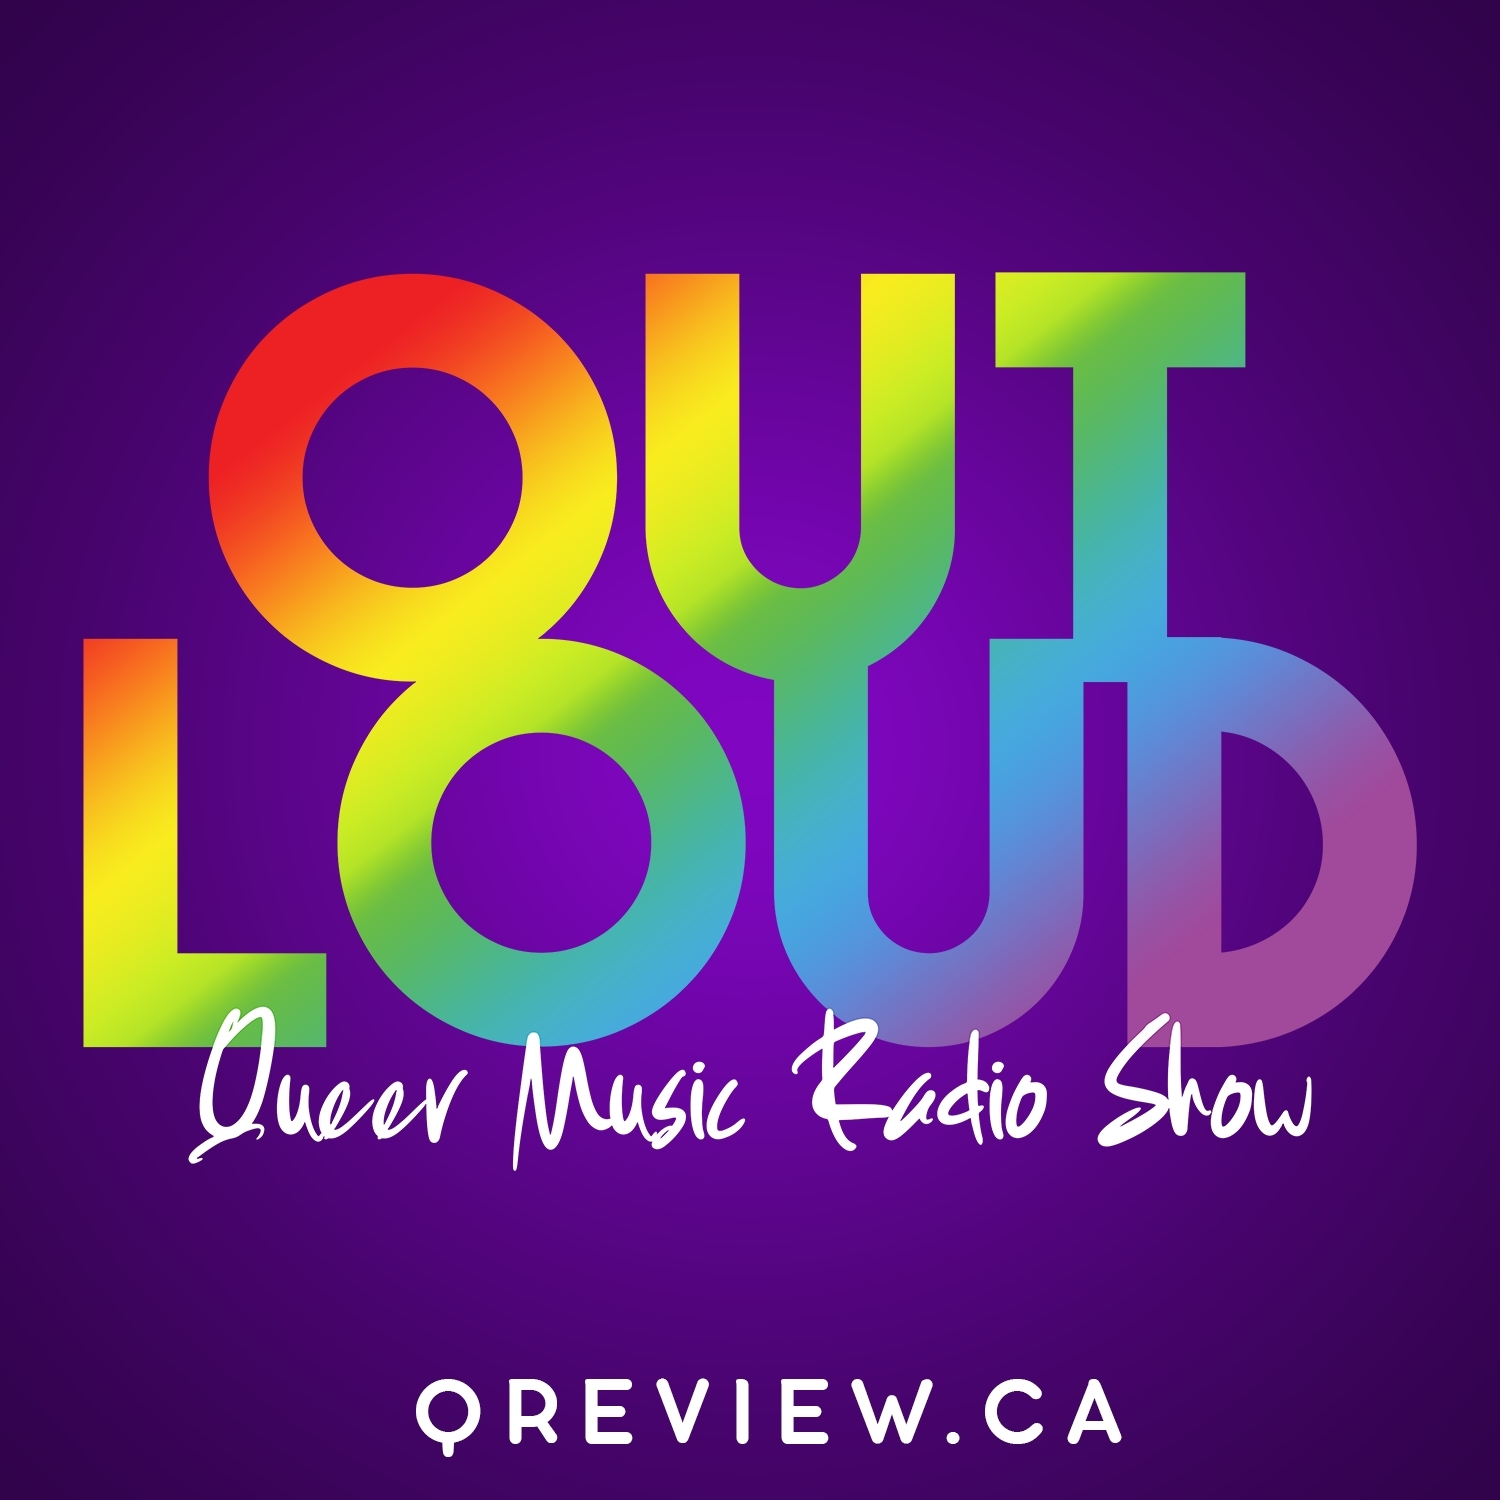 Out Loud Queer Music Radio